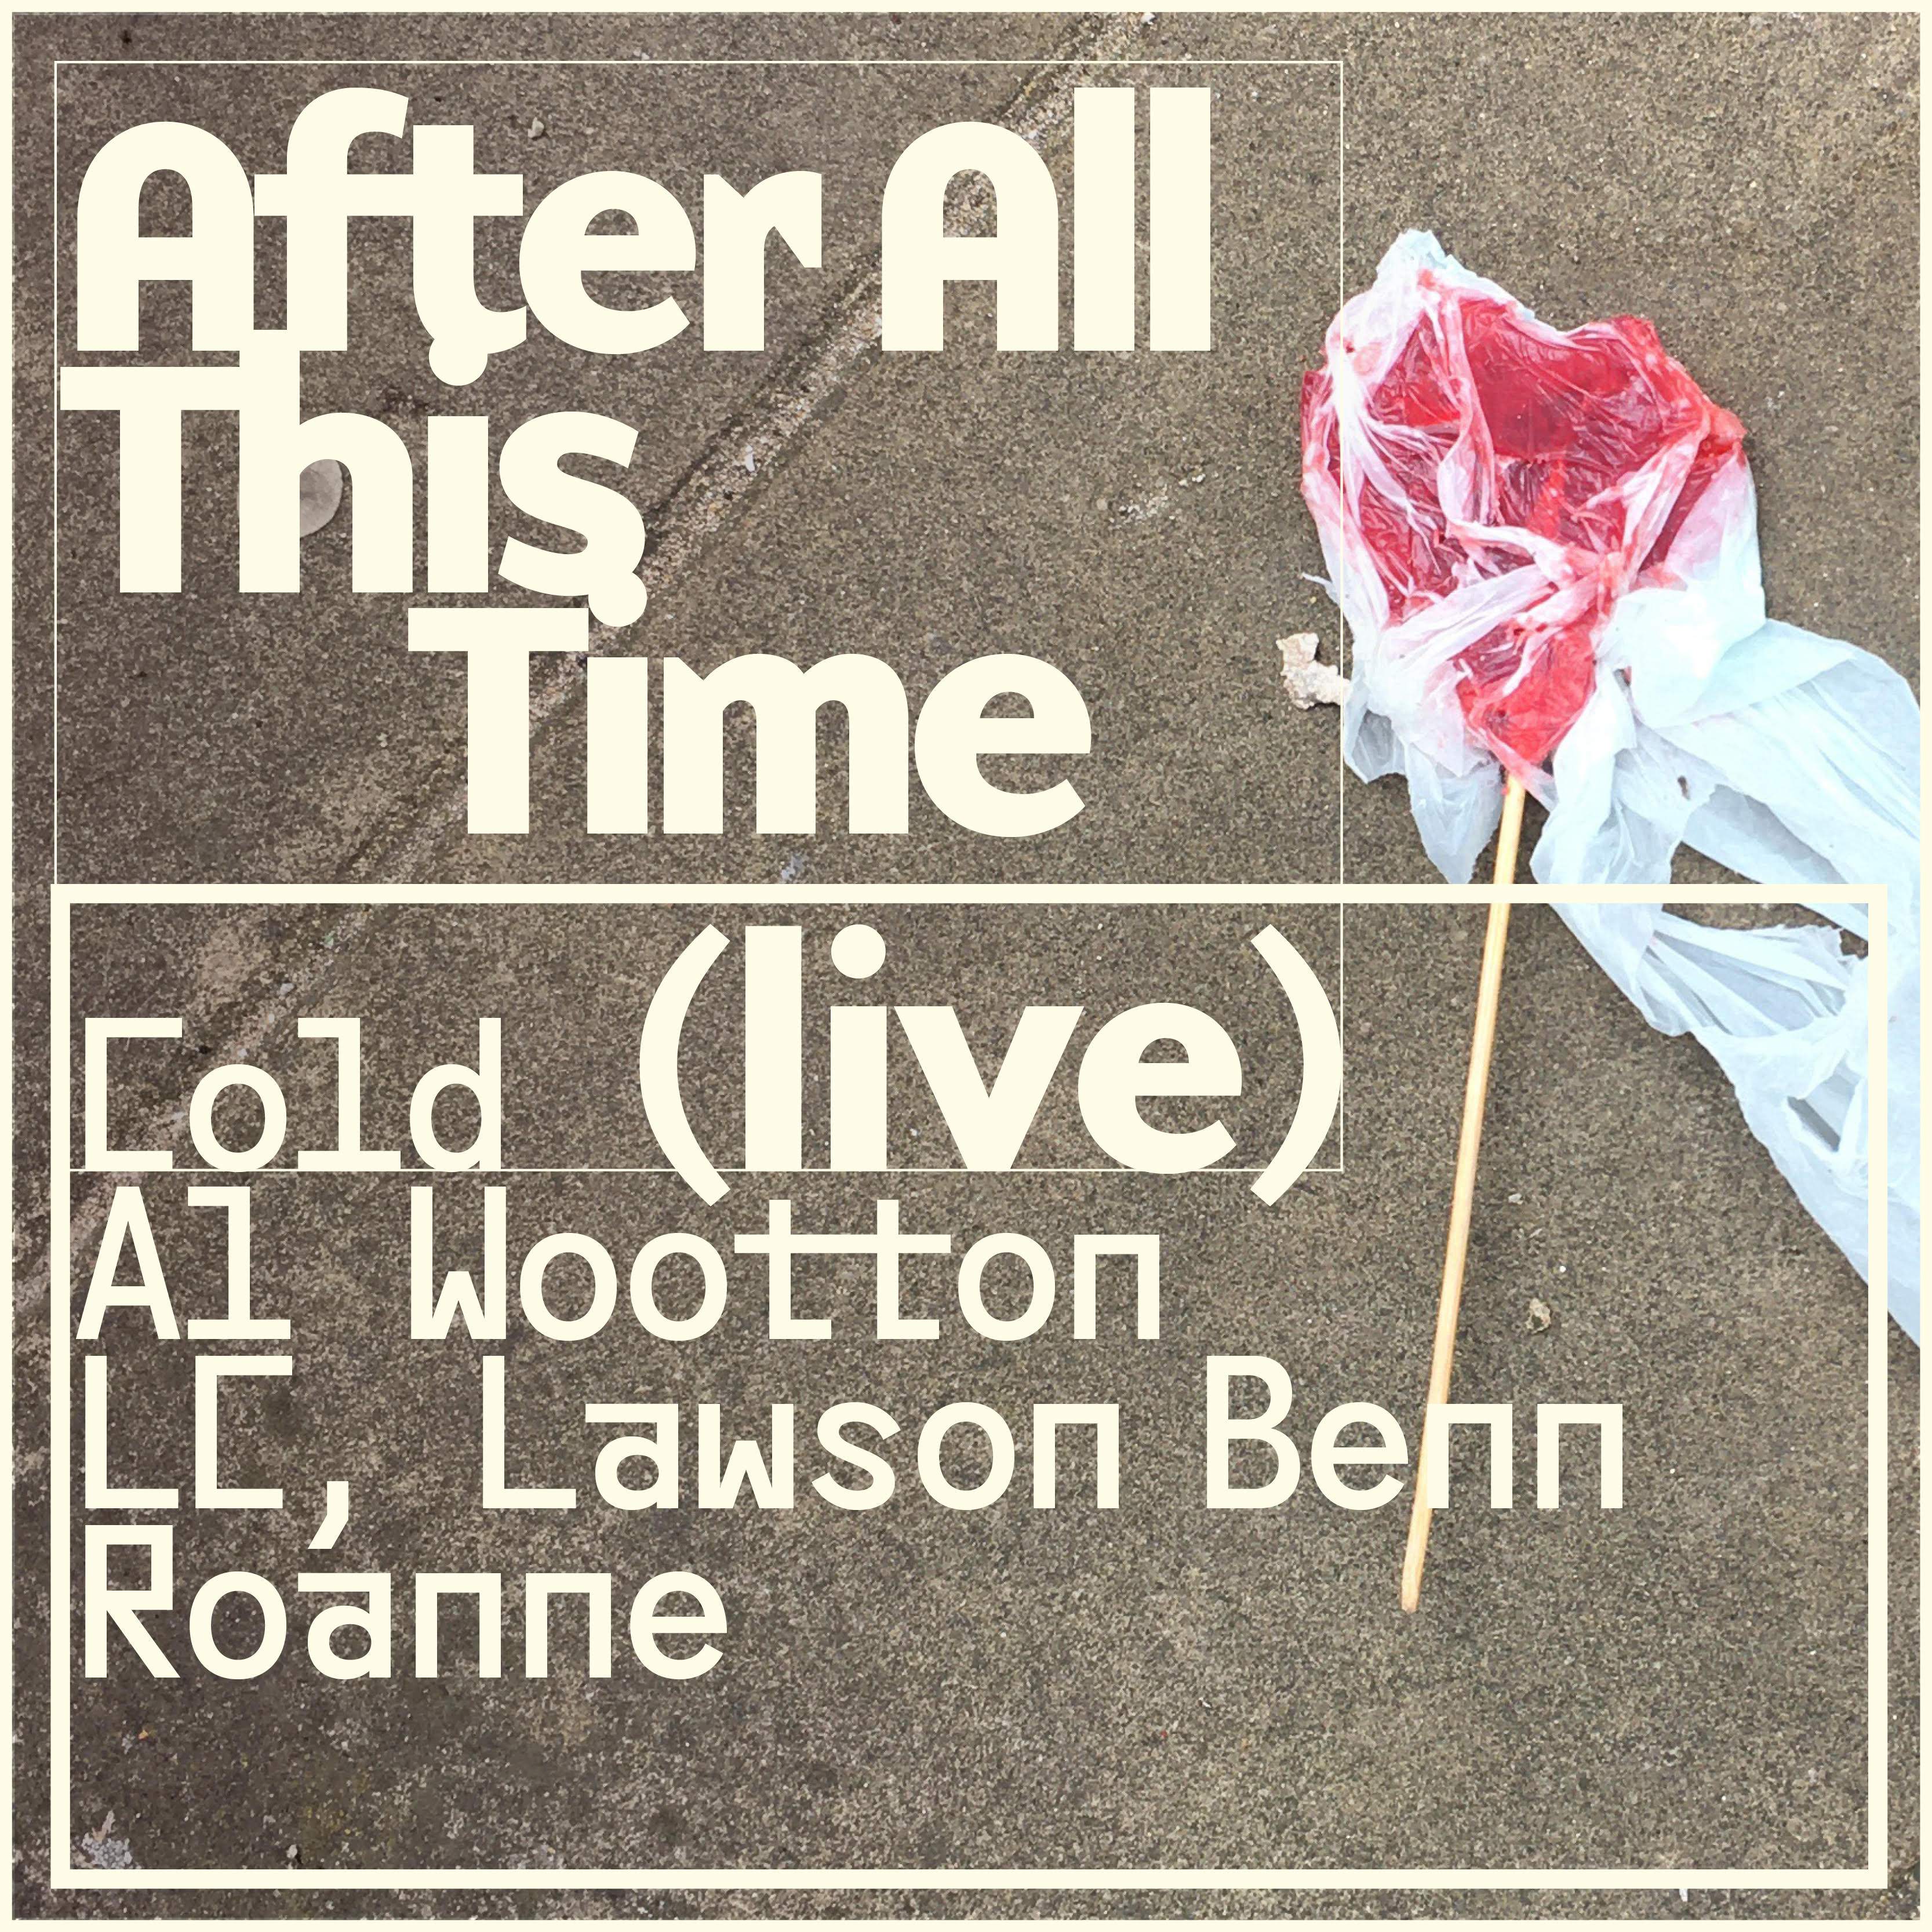 After All This Time w/ Cold (LIVE), Al Wootton, LC, Lawson Benn & Roanne - フライヤー表